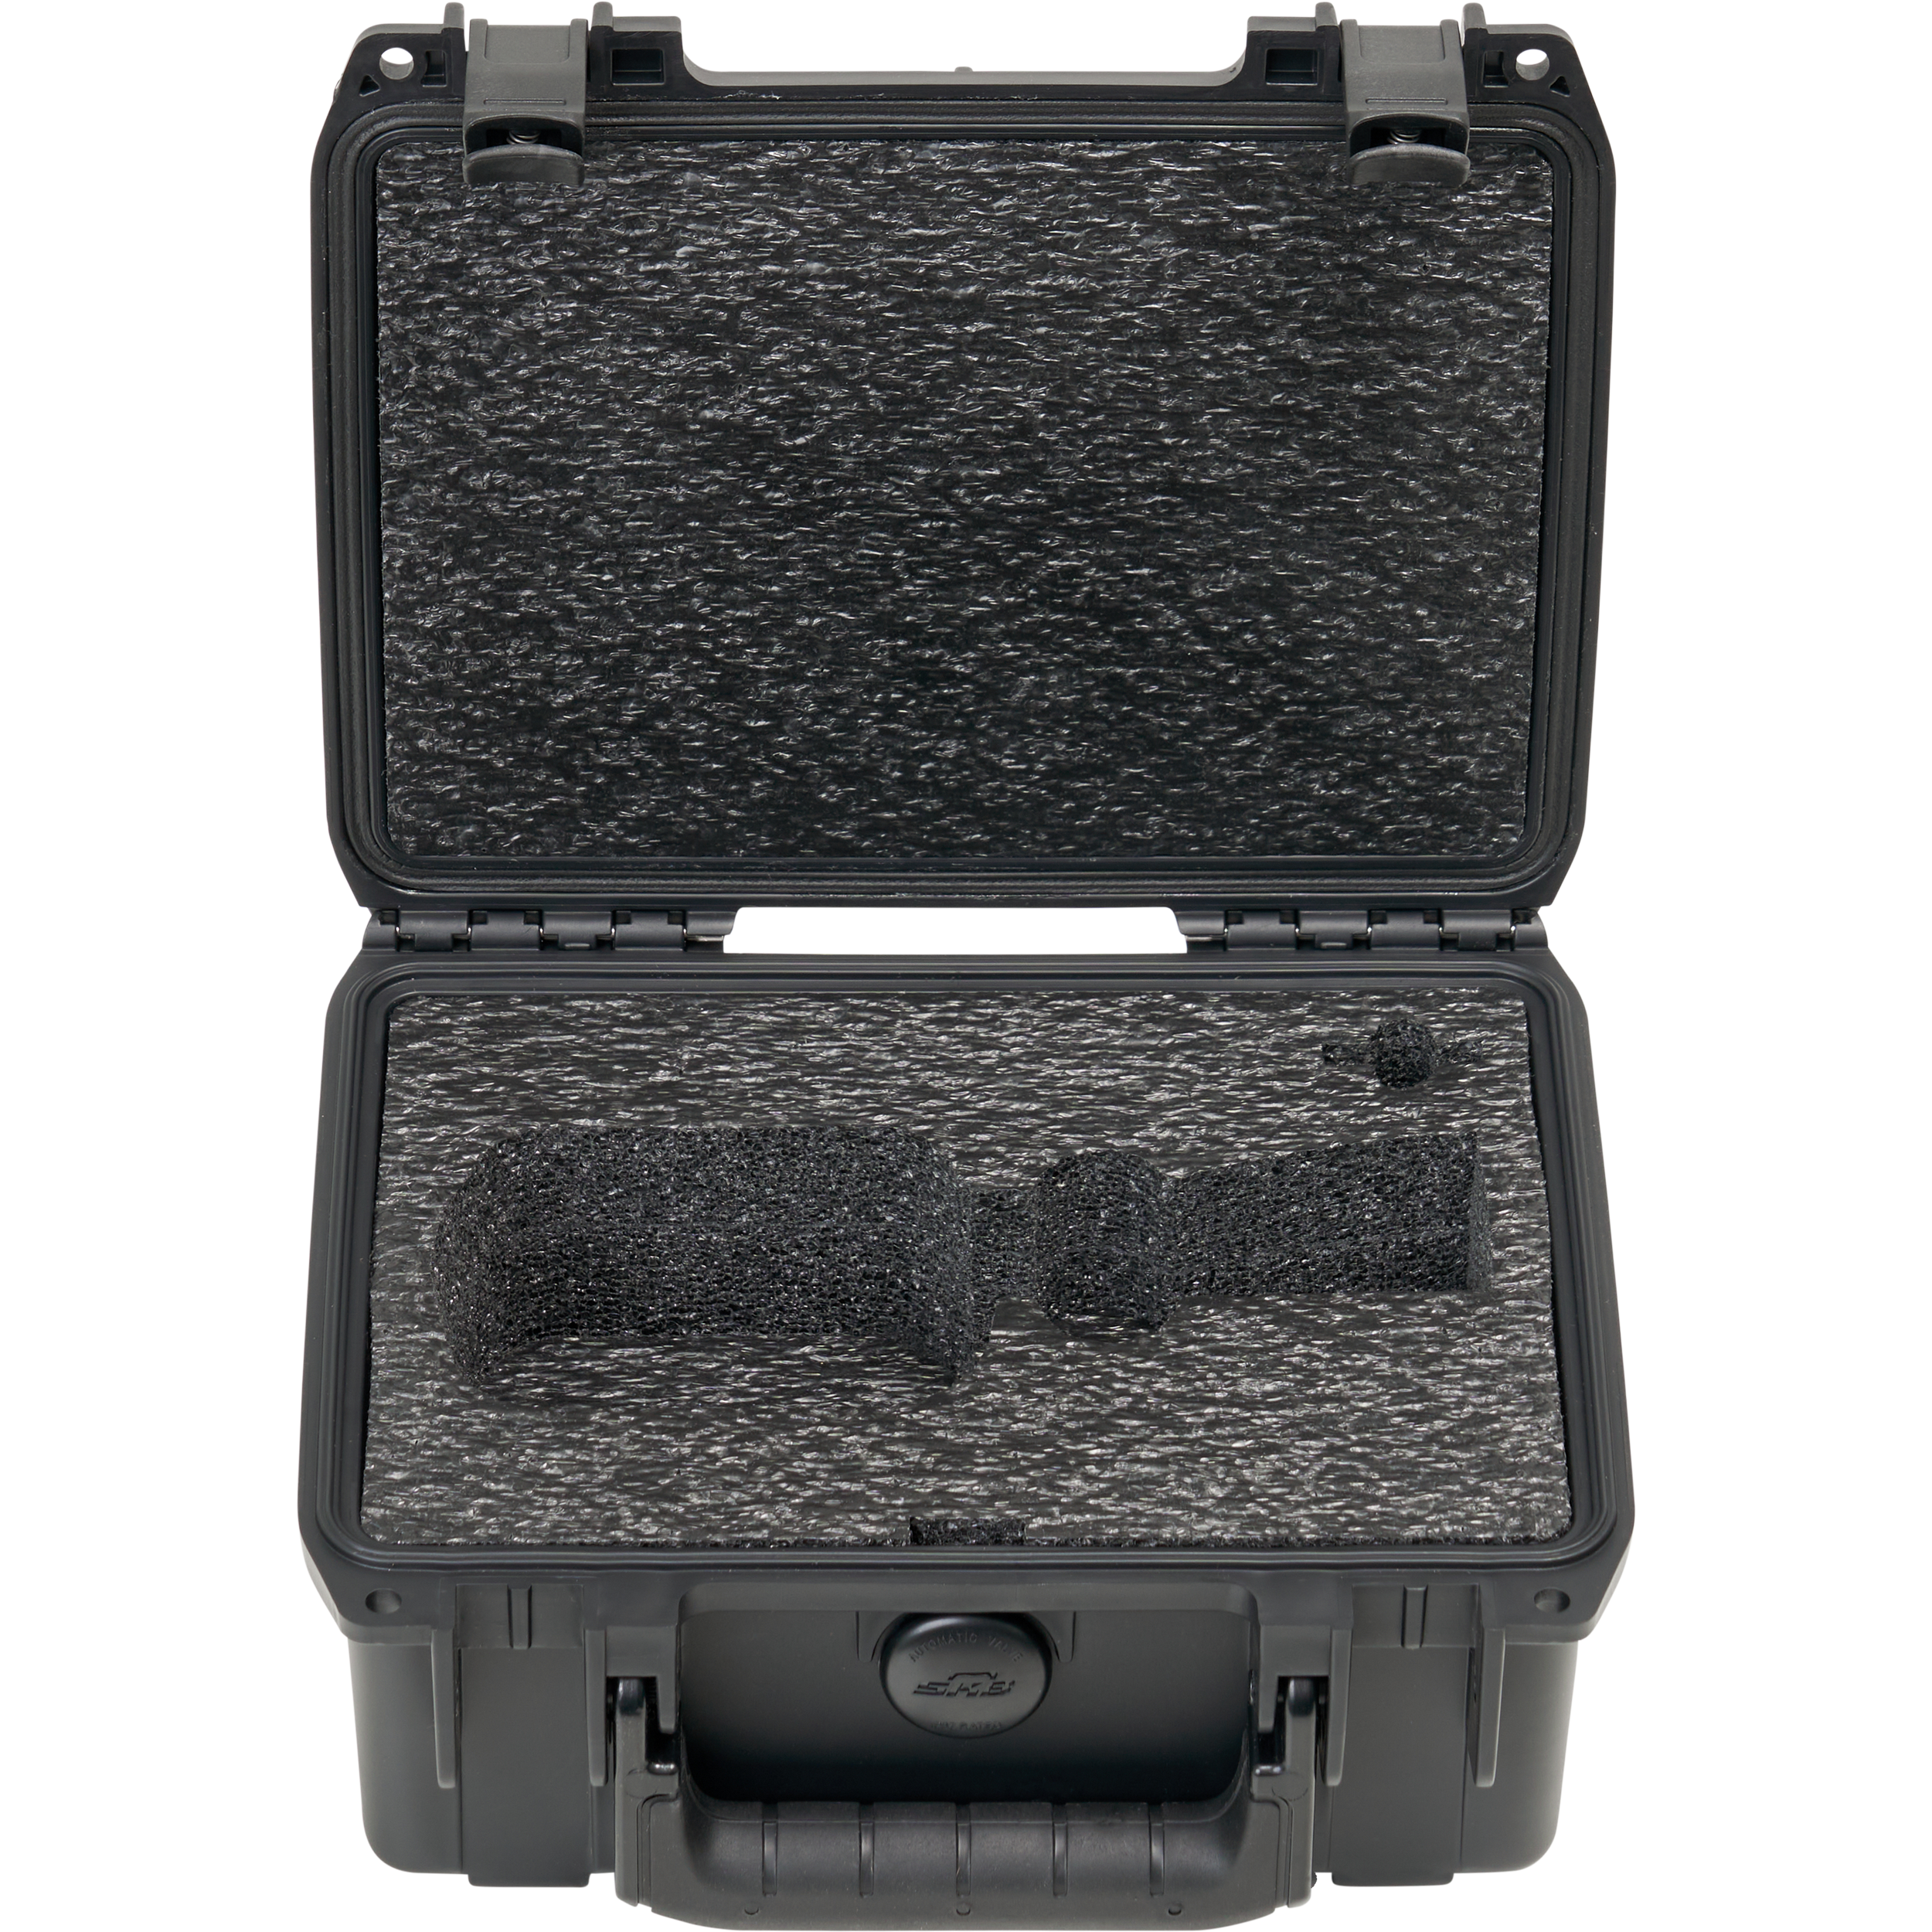 BYFP ipCase for Shure Super 55 Vocal Microphone